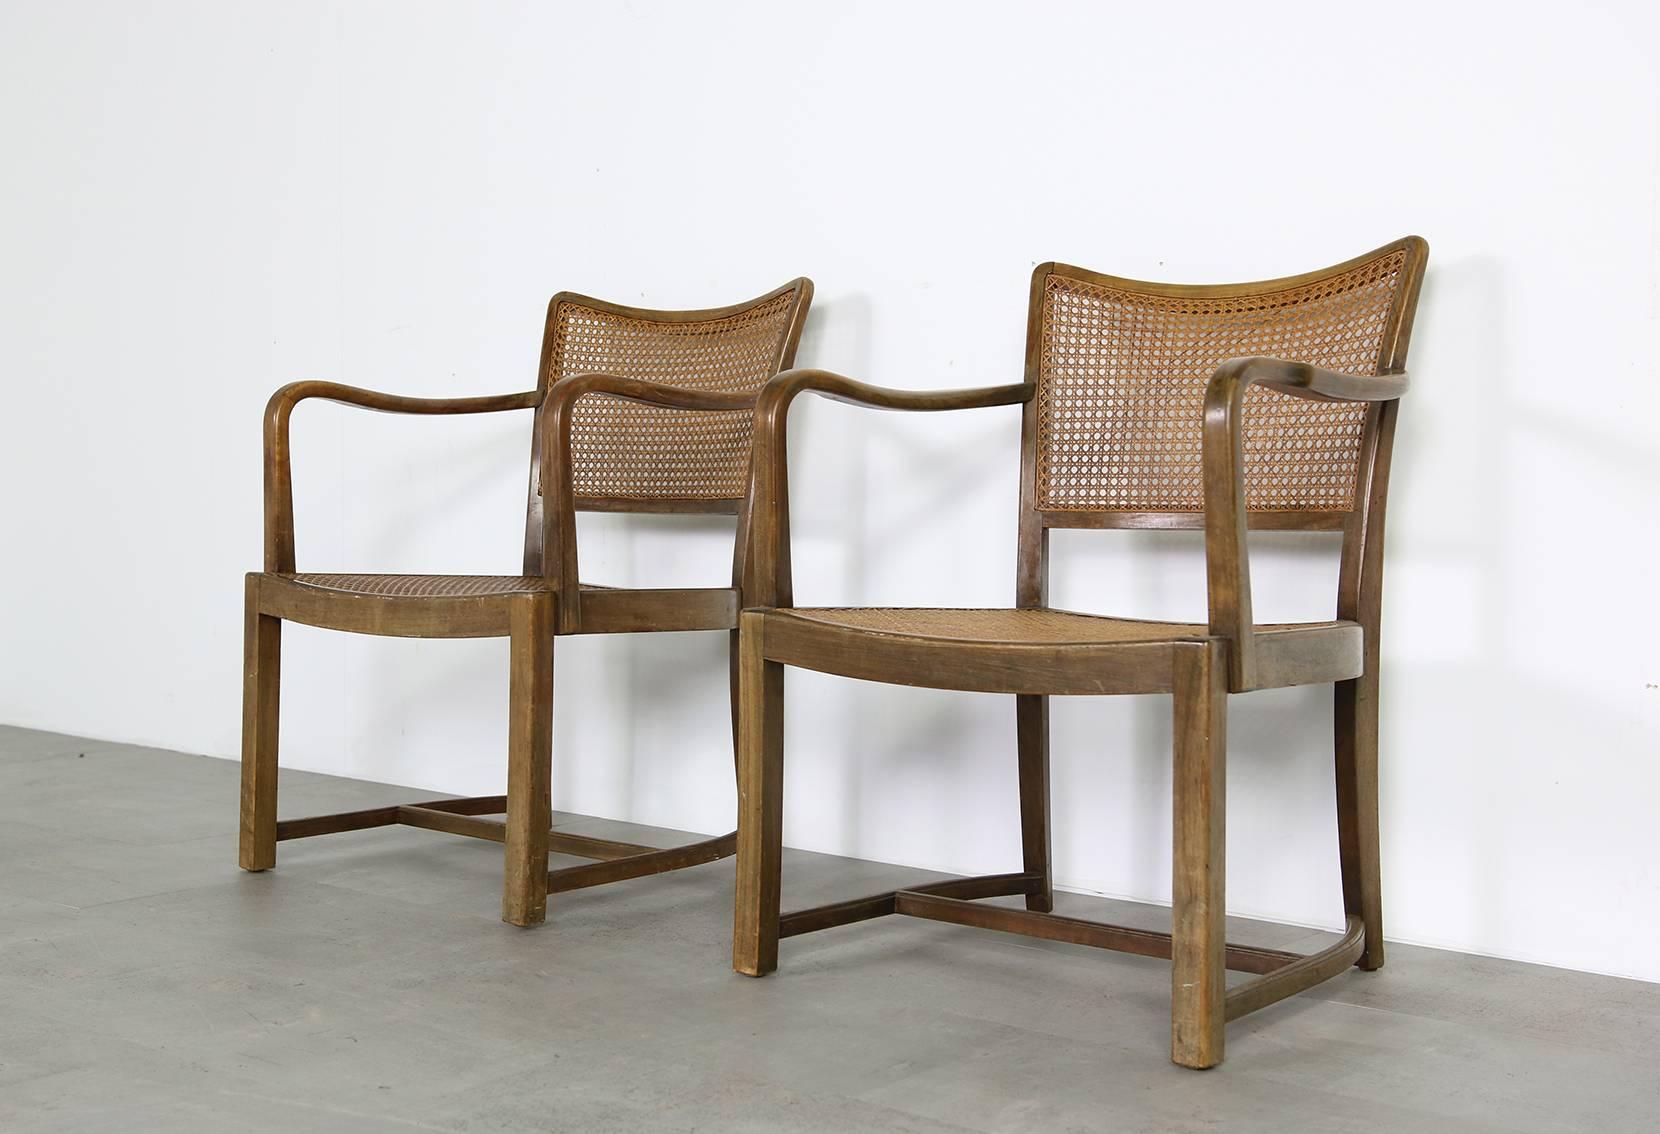 Mid-20th Century Pair of Vintage Midcentury Bentwood and Cane Chairs 1950s Post War Modern For Sale